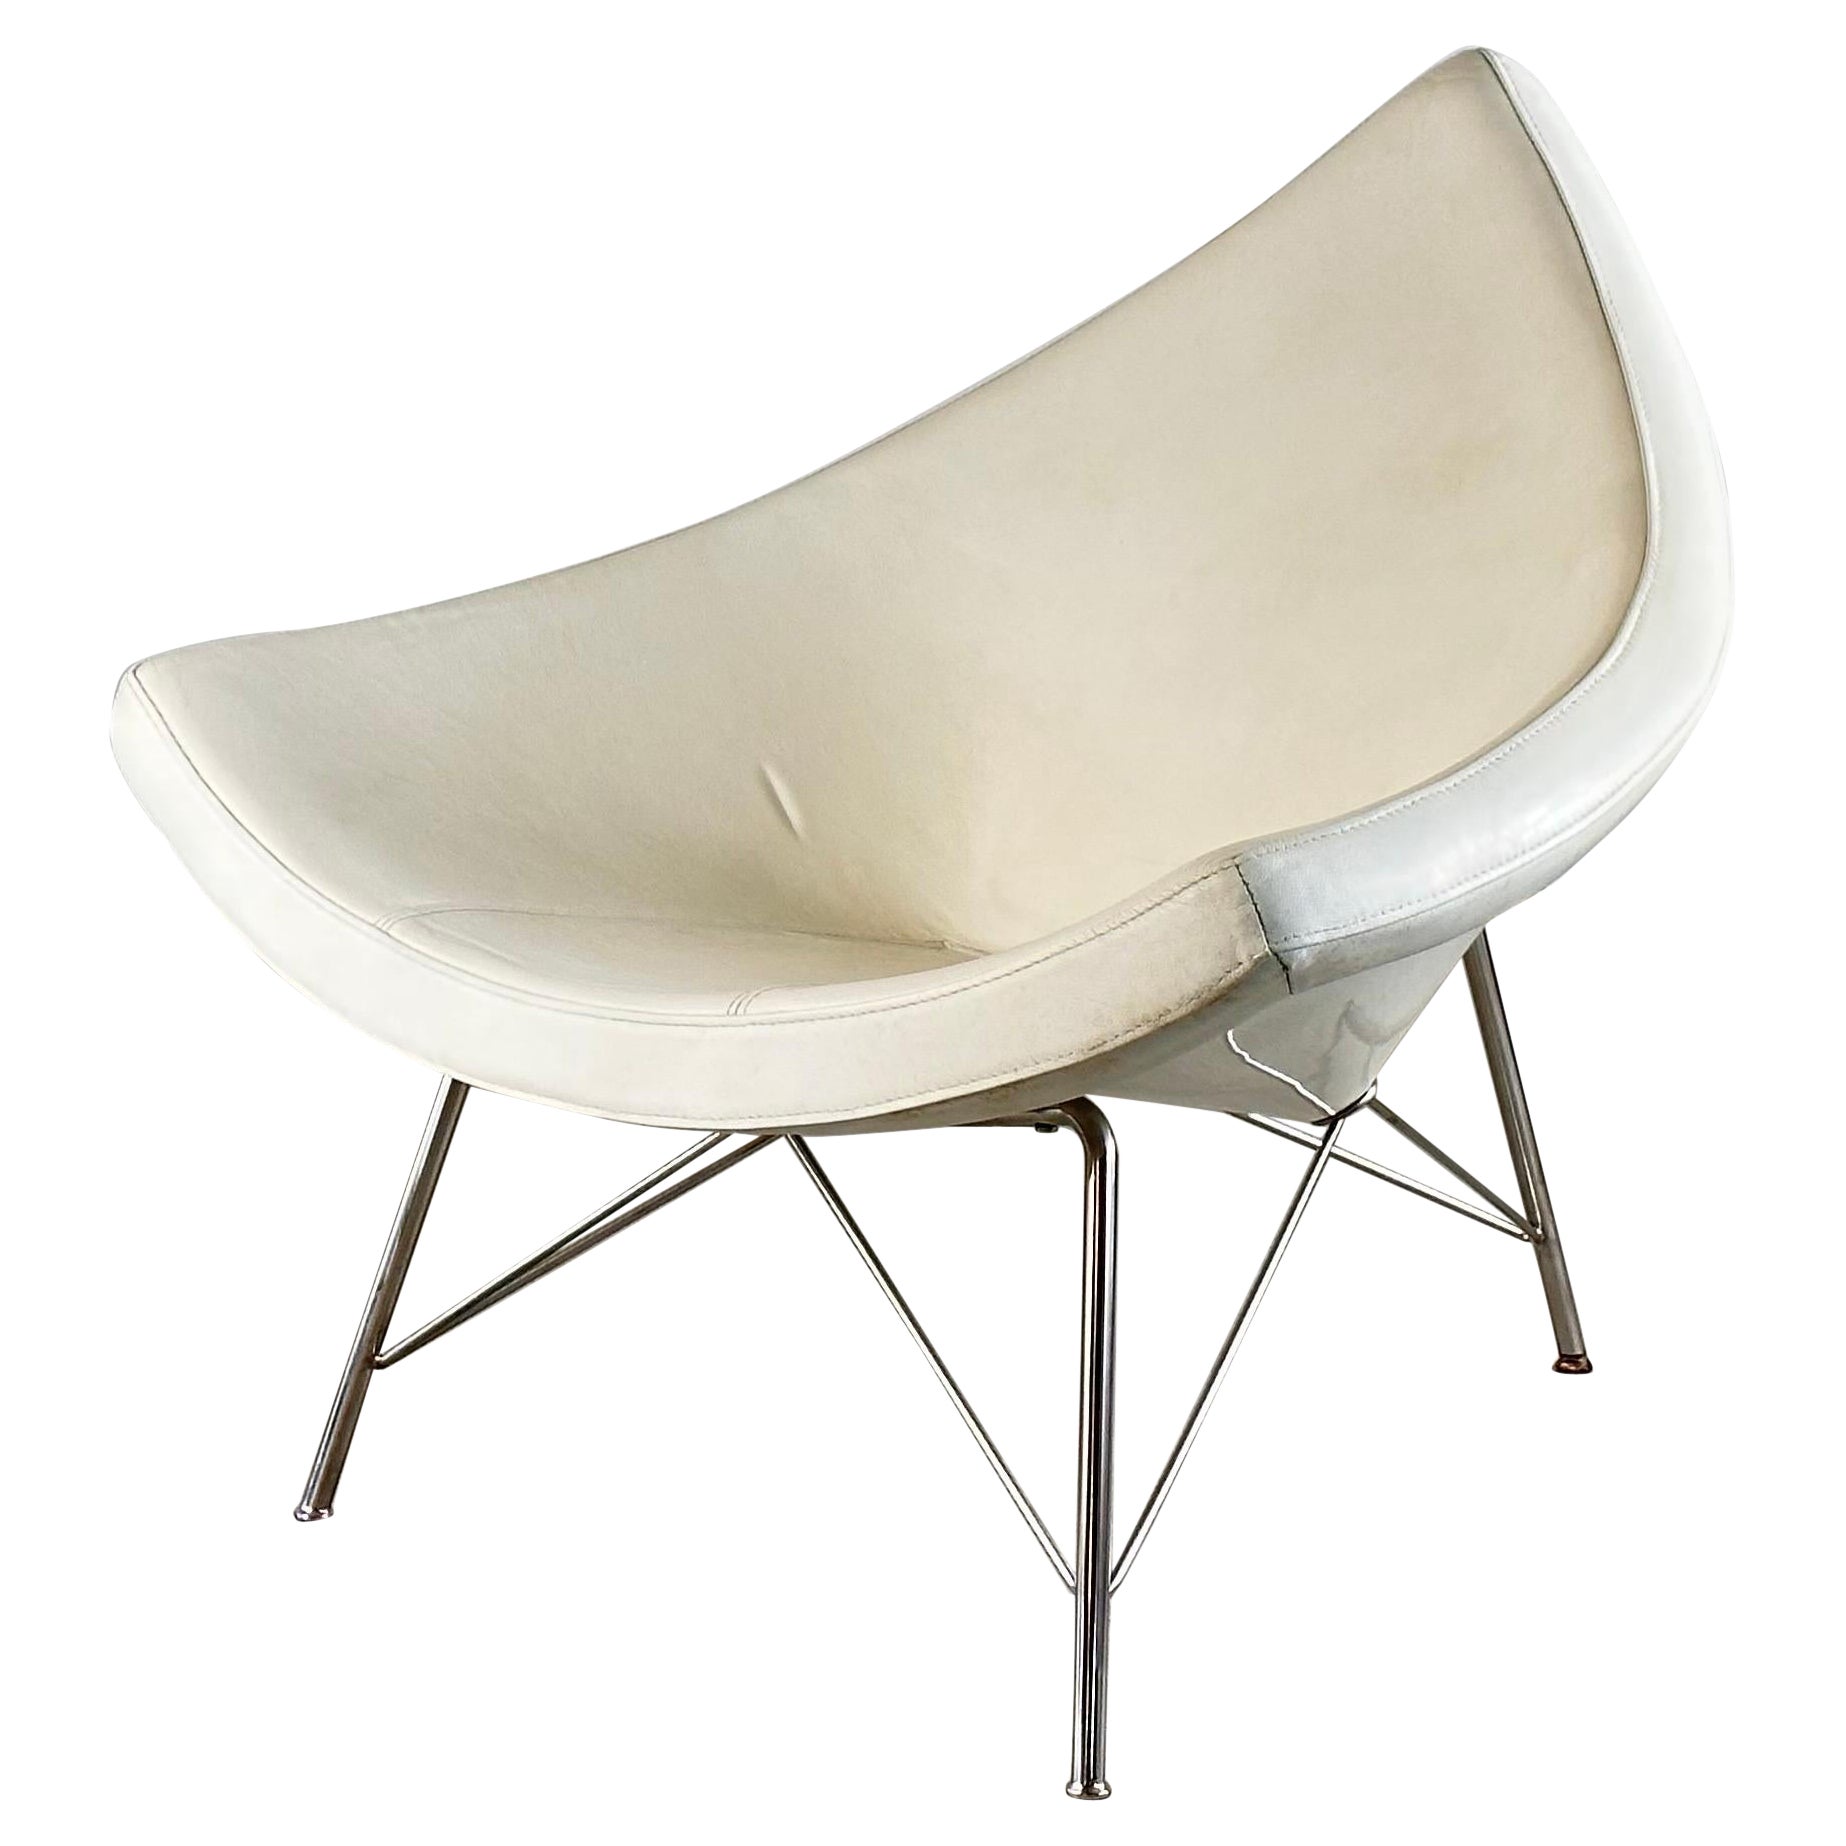 "Coconut" Chair in White Leather by George Nelson for H. Miller by Vitra, 1990